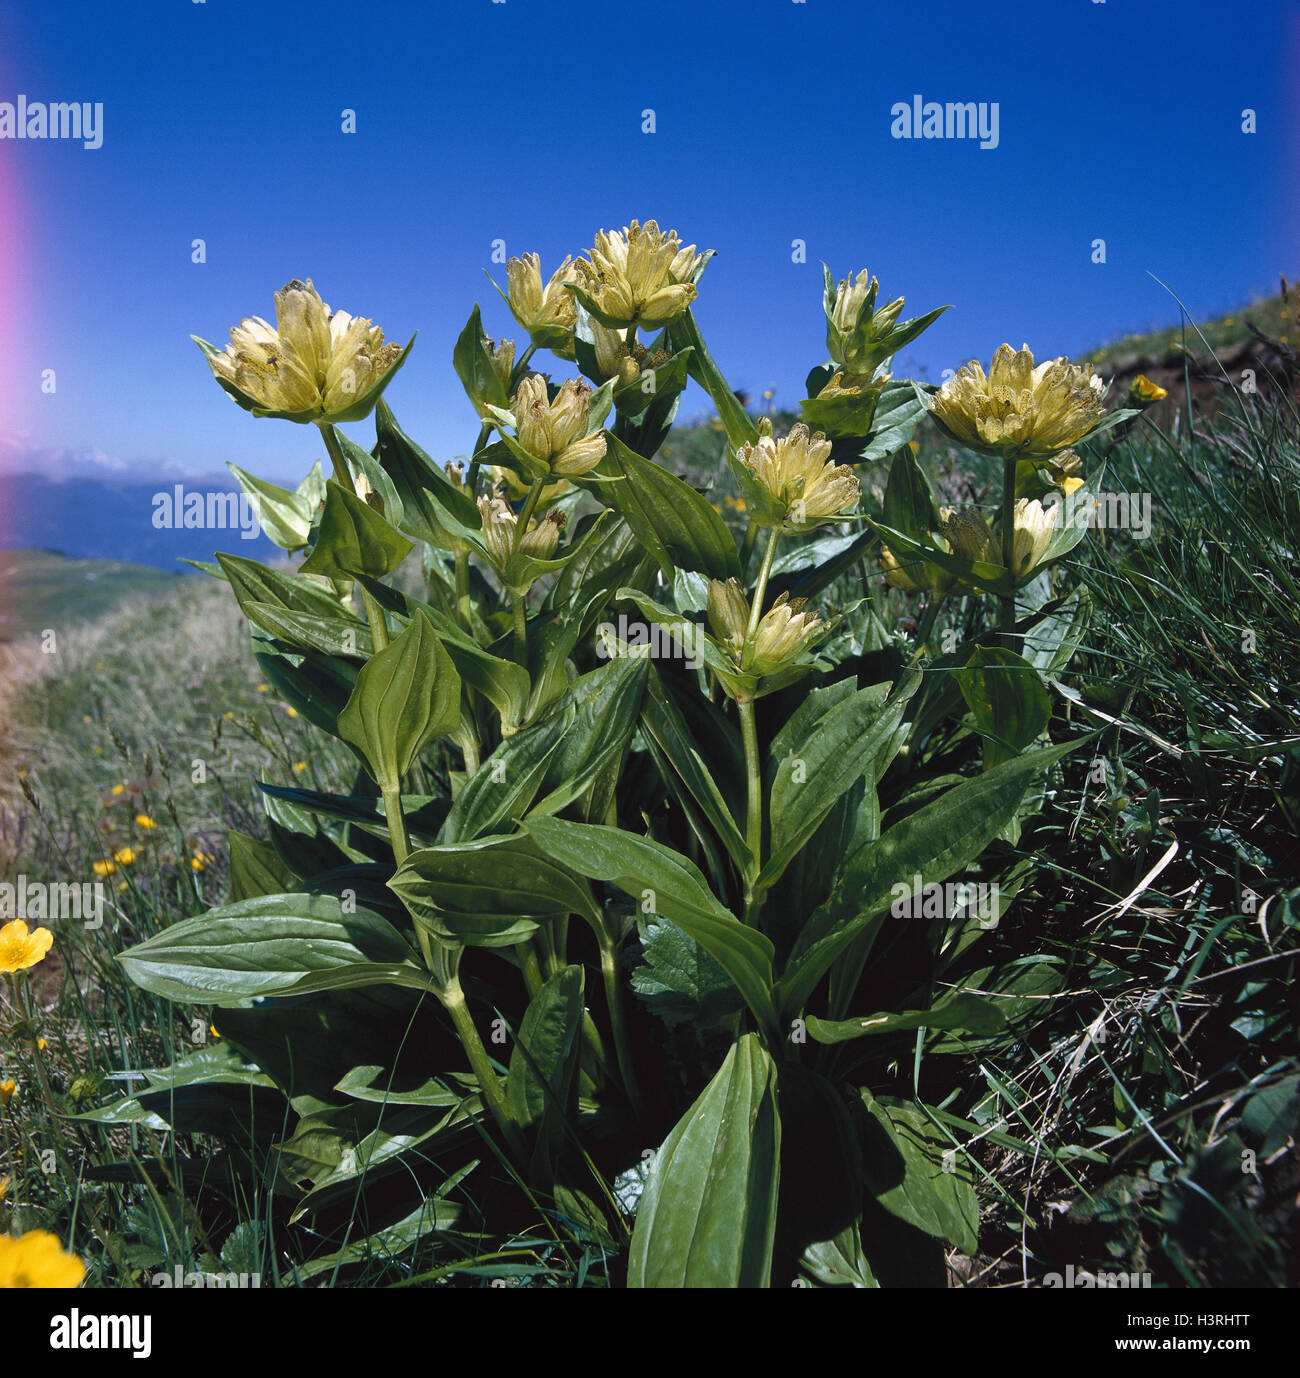 Dotted gentian, Gentiana punctata nature, botany, FIora, plants, flowers, Alpine flowers, Alpine flora, Einzian, gentian plants, blossoms, blossom, yellow, period bloom, from July to September, Italy, the Dolomites Stock Photo